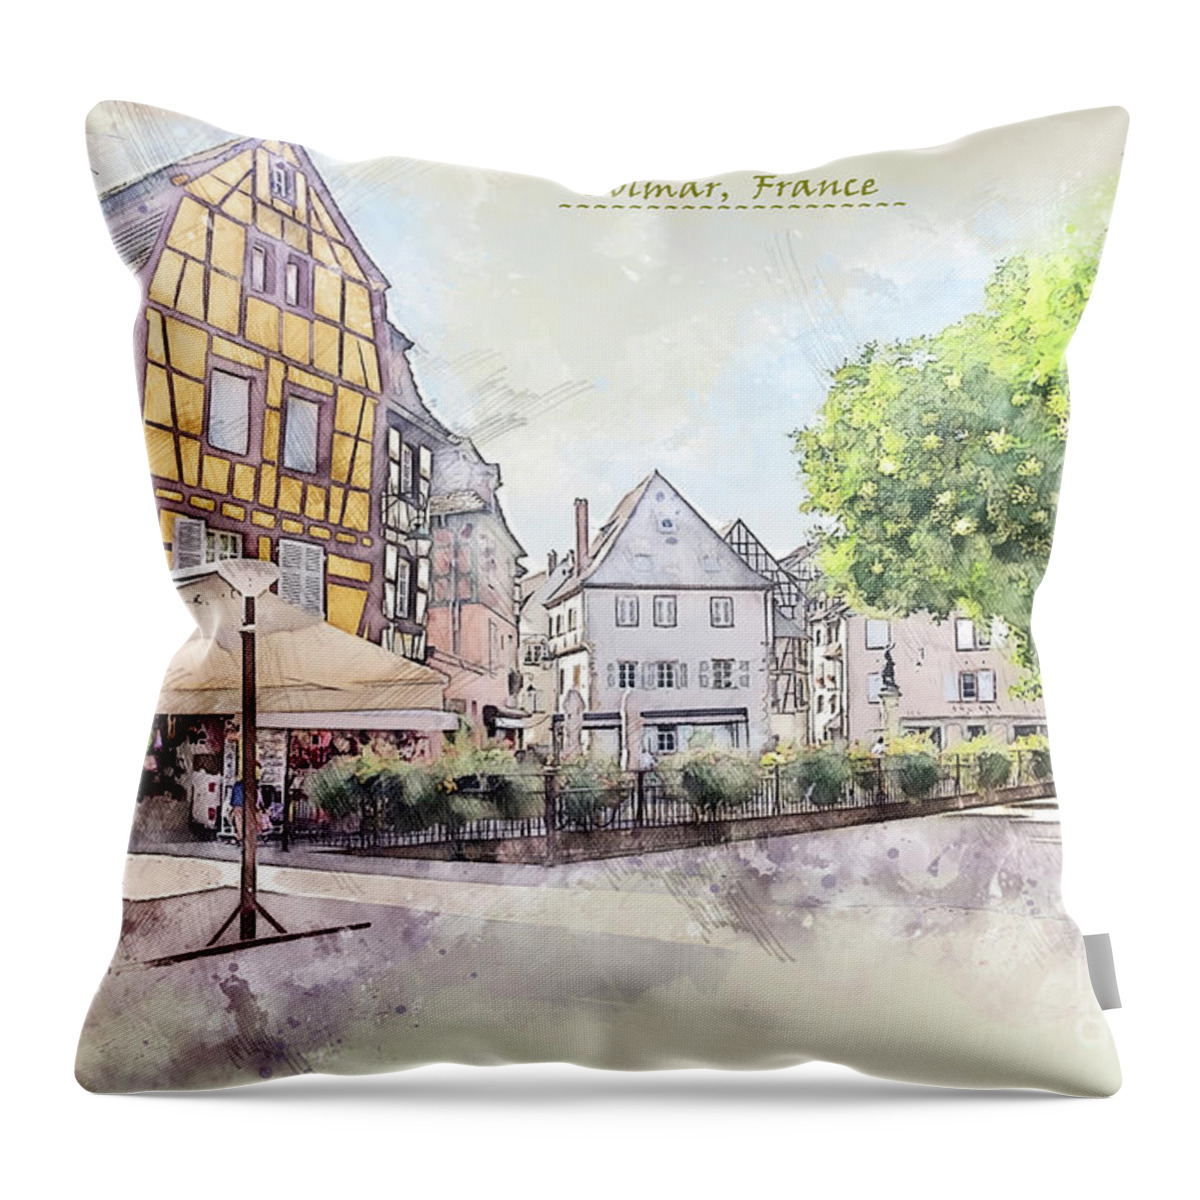 Artistic Throw Pillow featuring the digital art France sketch #7 by Ariadna De Raadt